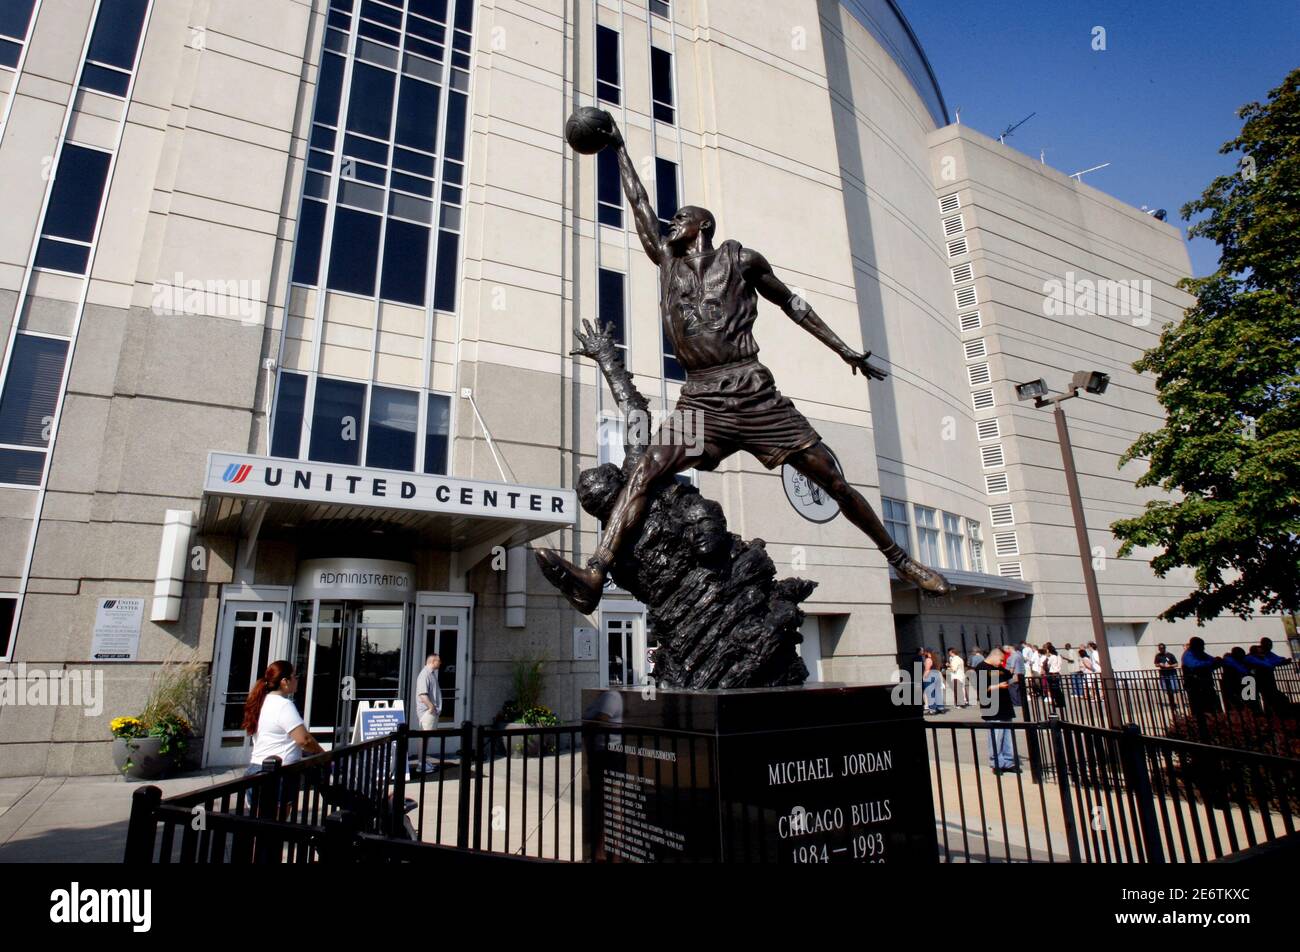 CHICAGO, USA- 6 OKTOBER 2007:  Match Arena United Center in Chicago. Statue of Michael Jordan outside. Stock Photo